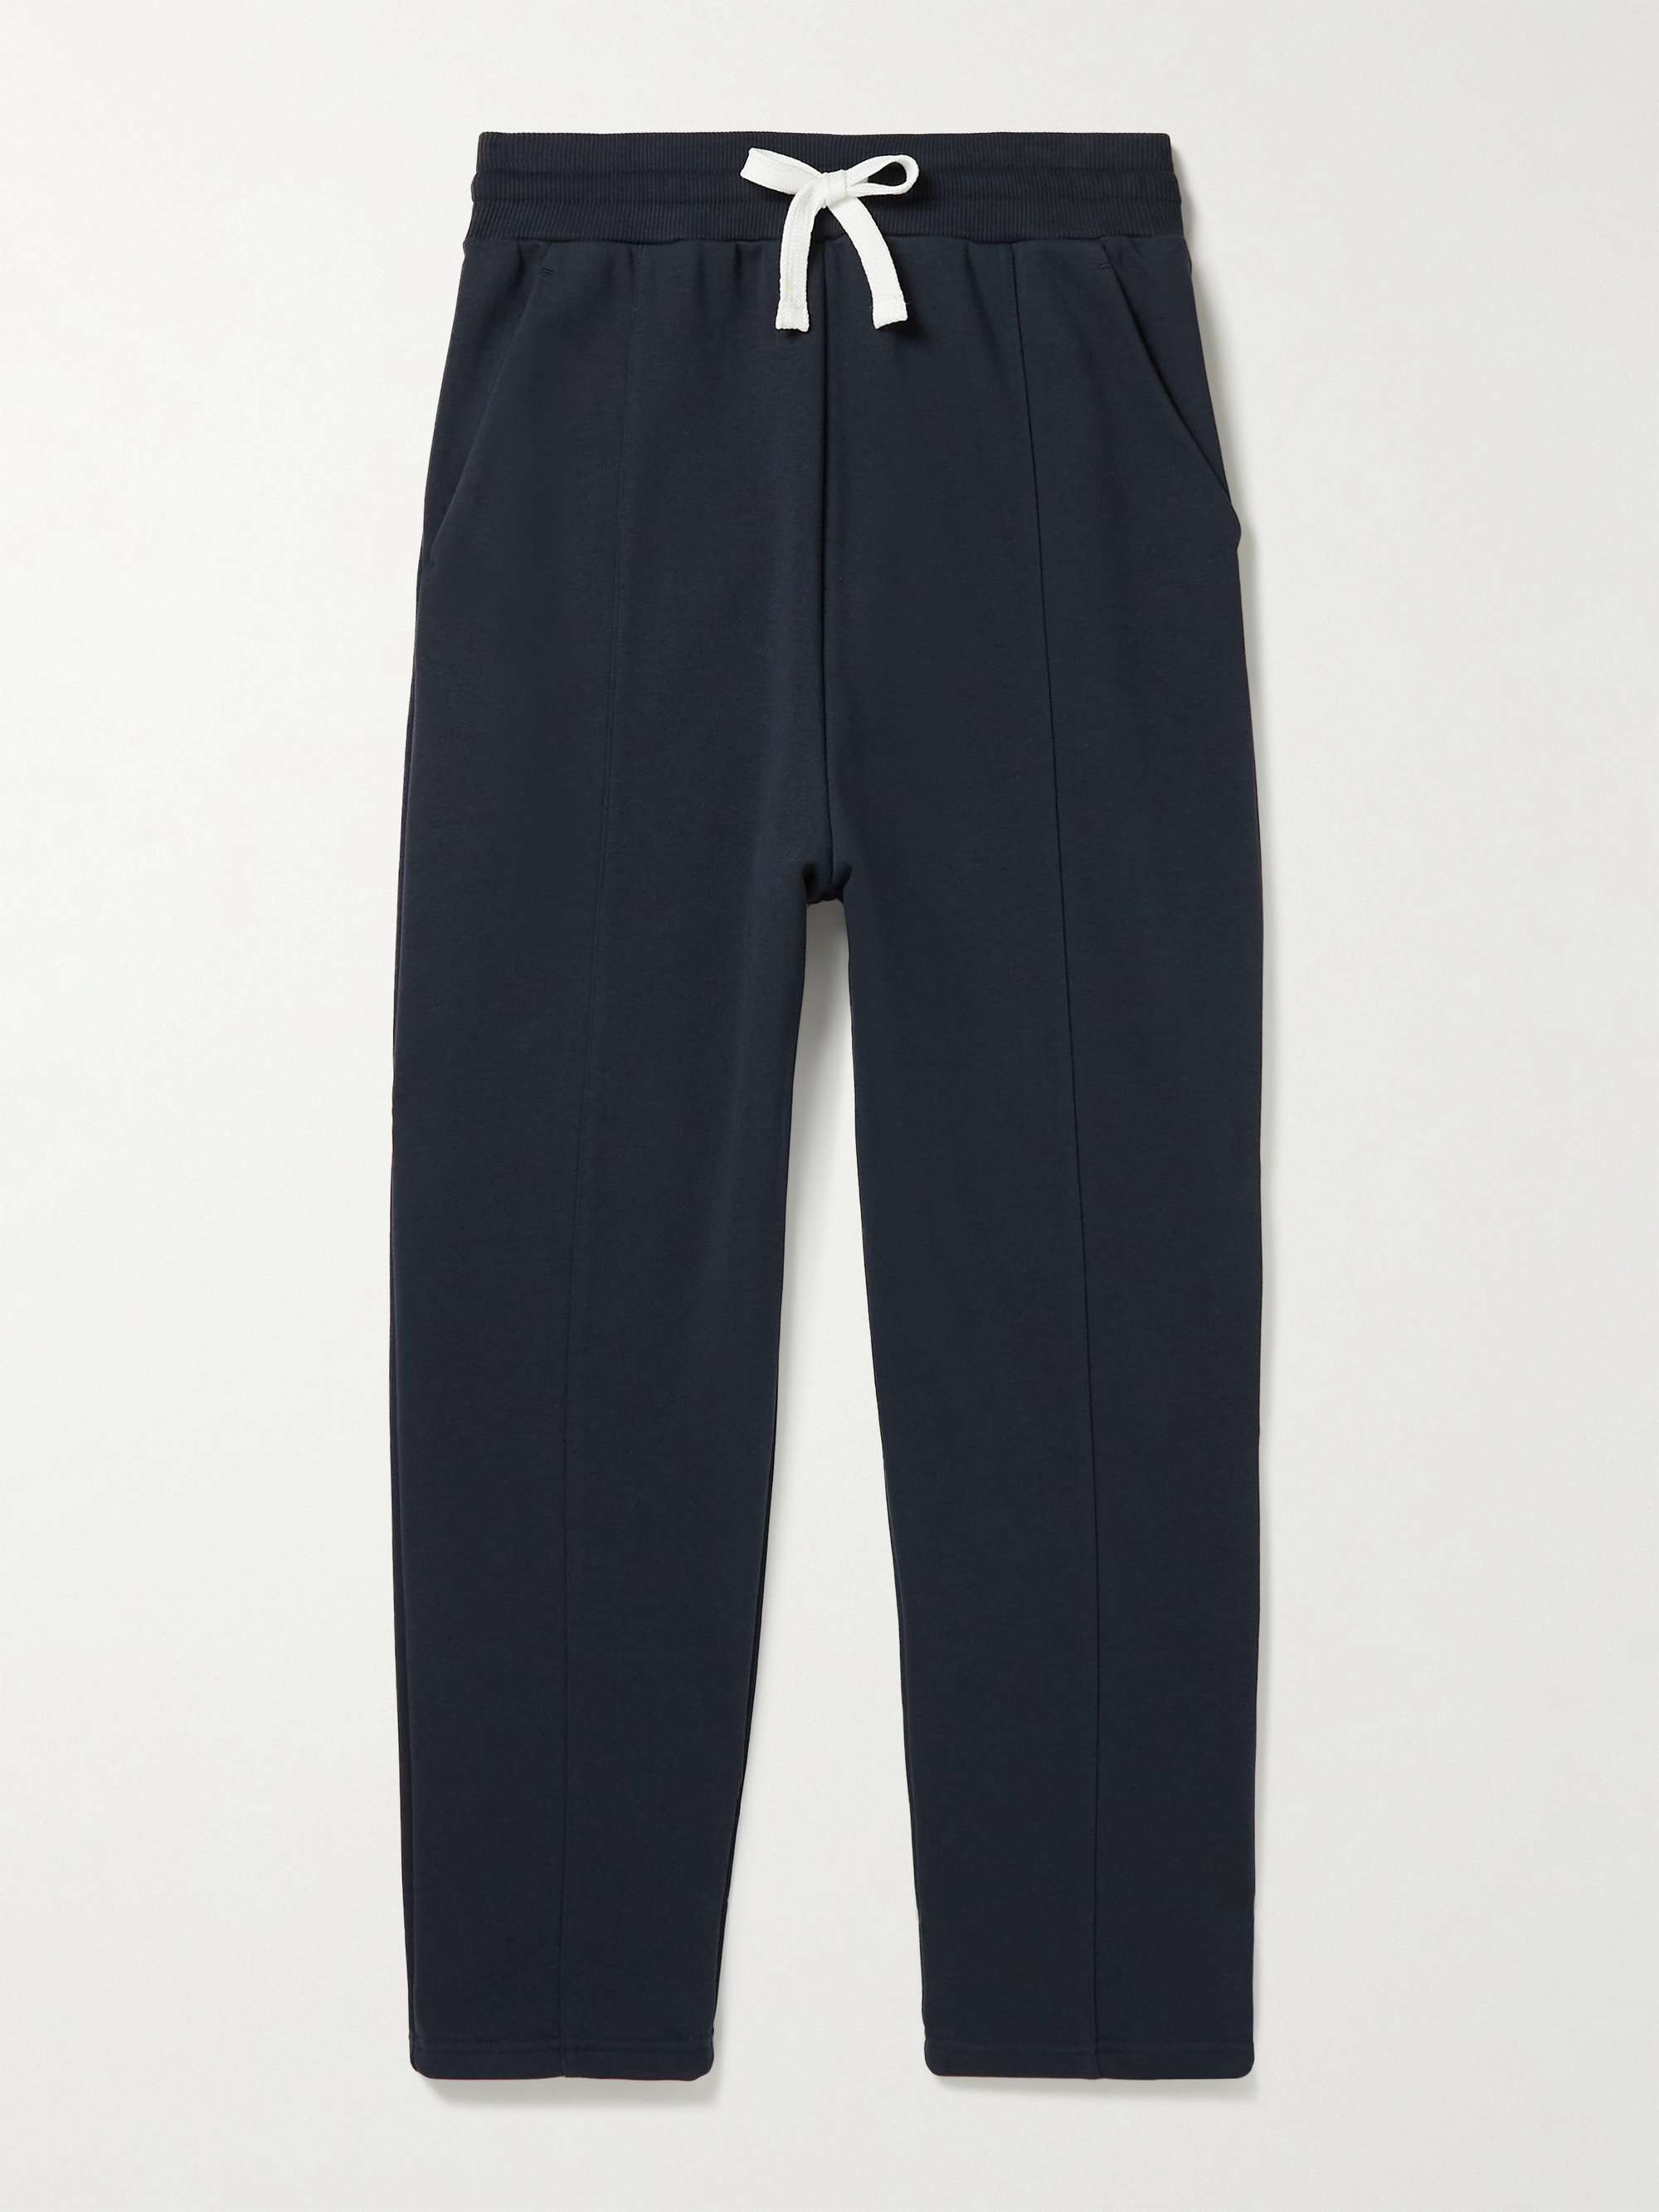 ZEGNA Tapered Cotton-Blend Jersey Sweatpants